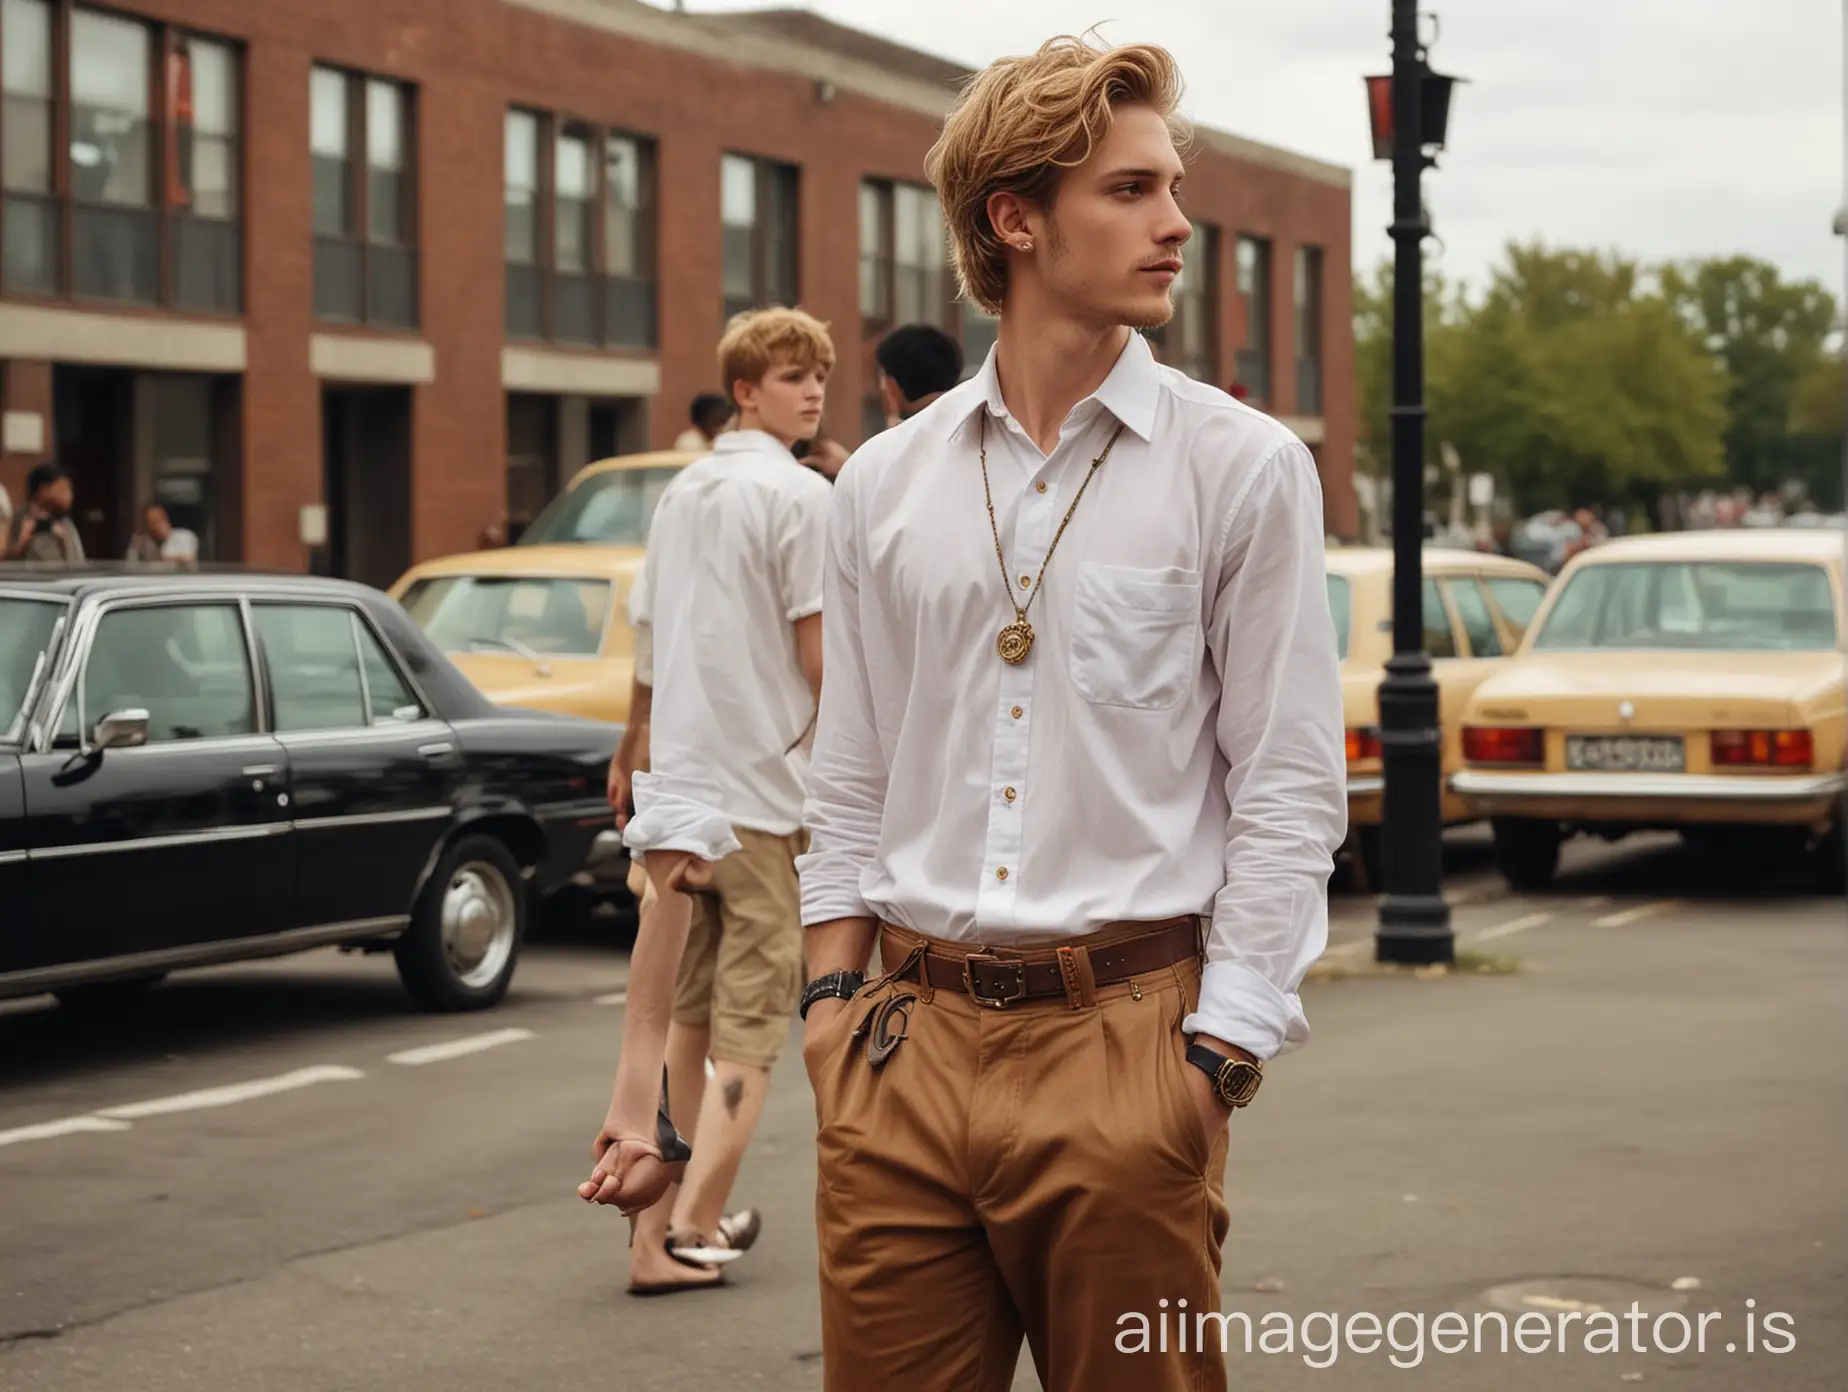 School-Parking-Lot-Scene-Students-Heading-to-Class-with-Stylish-Young-Man